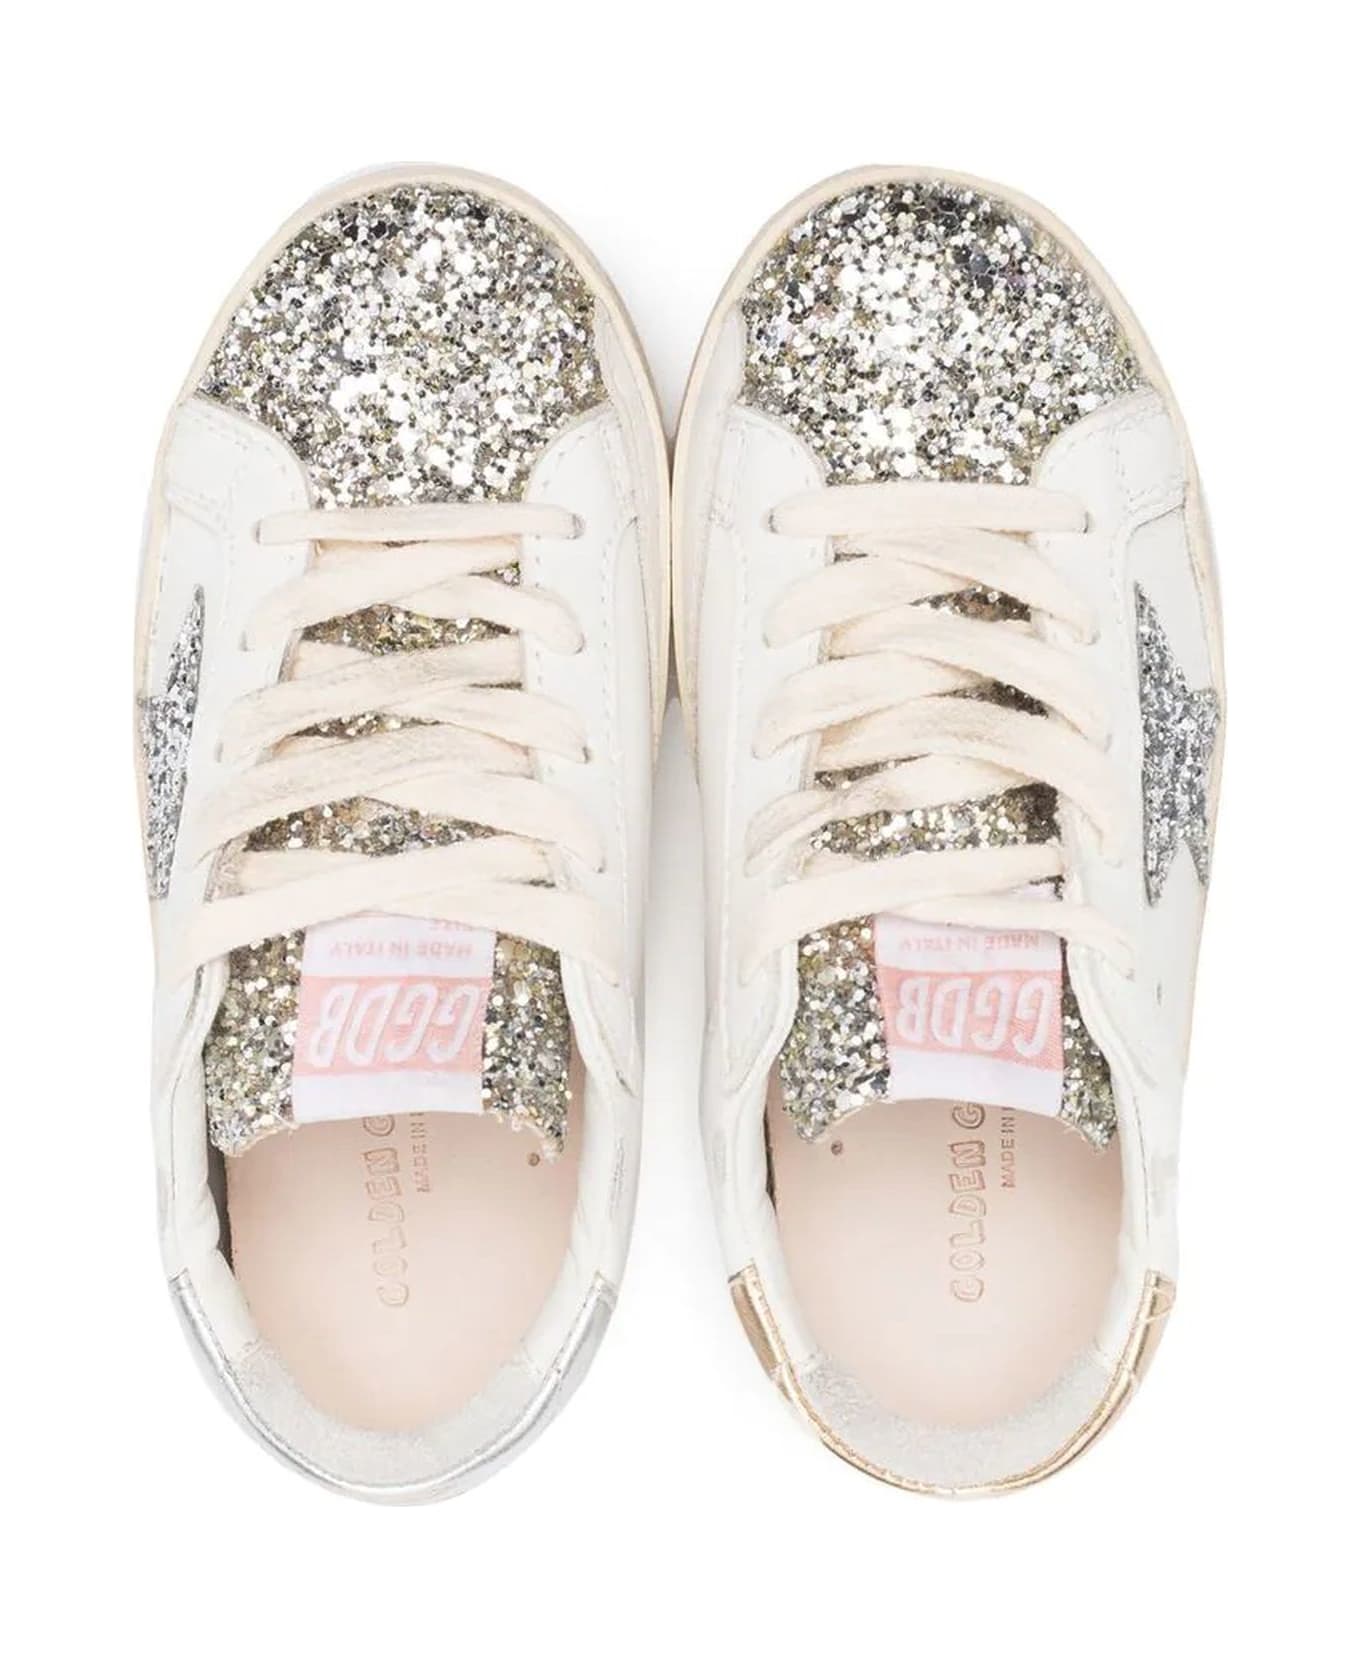 Golden Goose White Leather Sneakers - Bianco